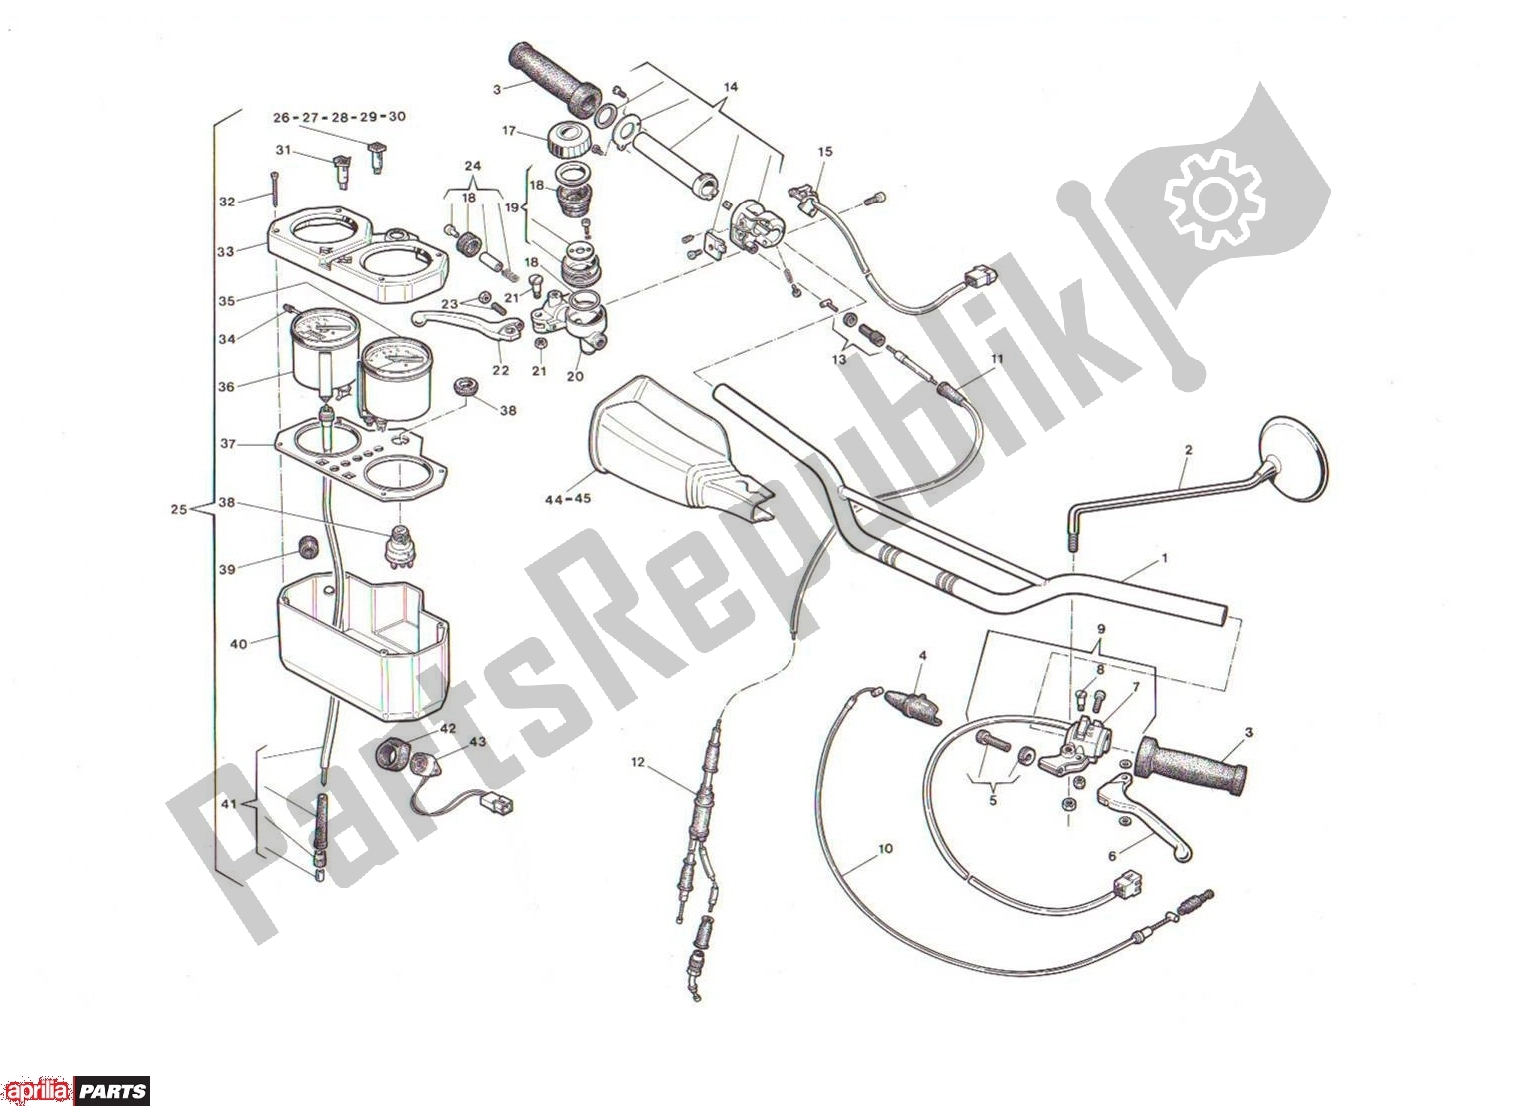 All parts for the Handle Bars of the Aprilia ETX 84 125 1980 - 1995